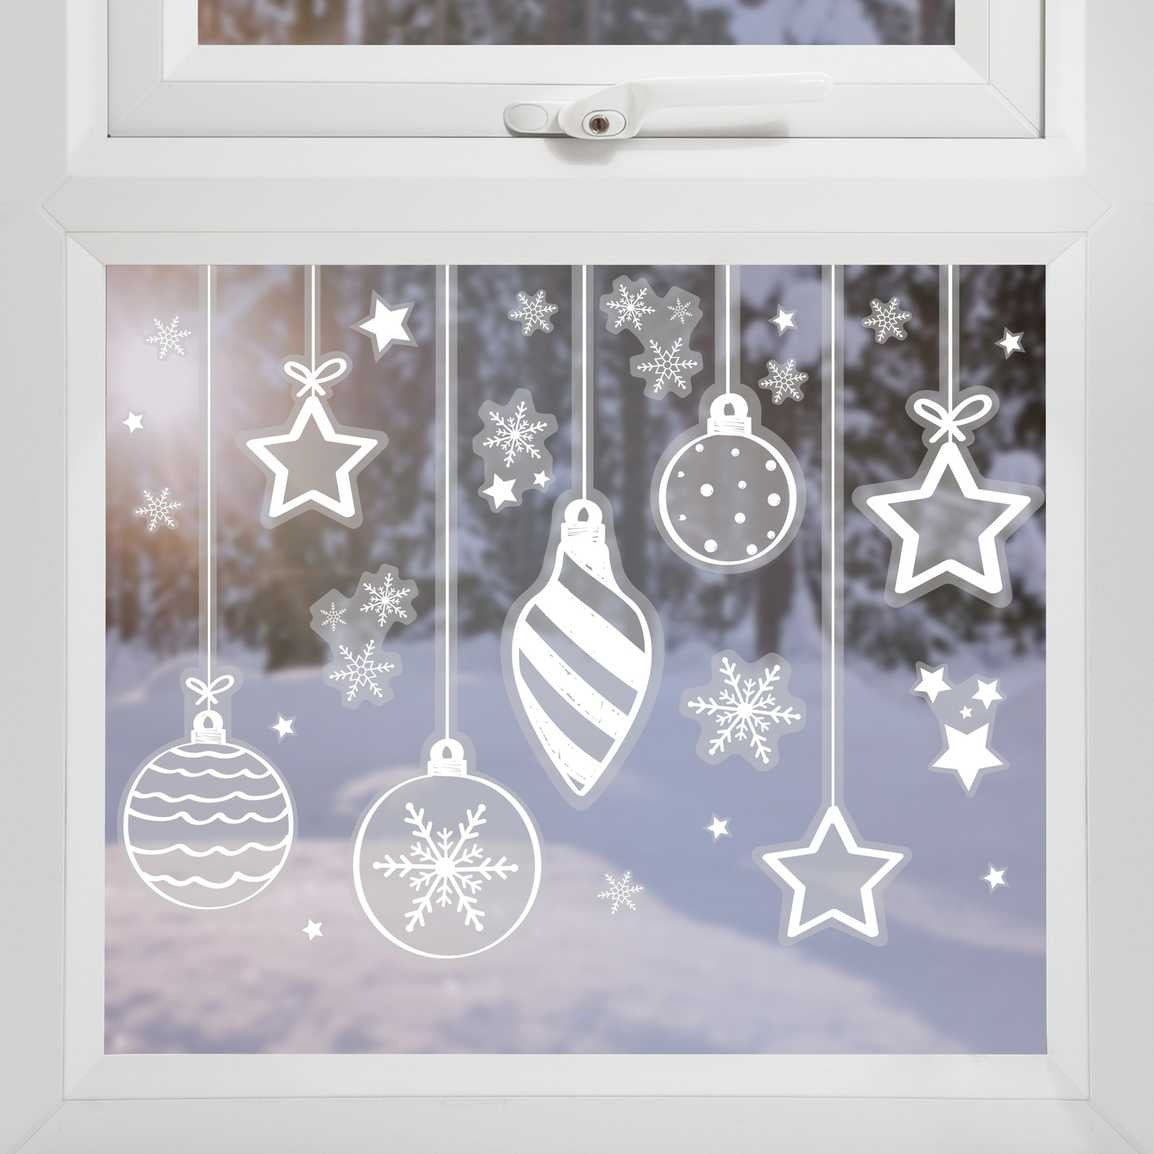 Window sticker with various Christmas figures